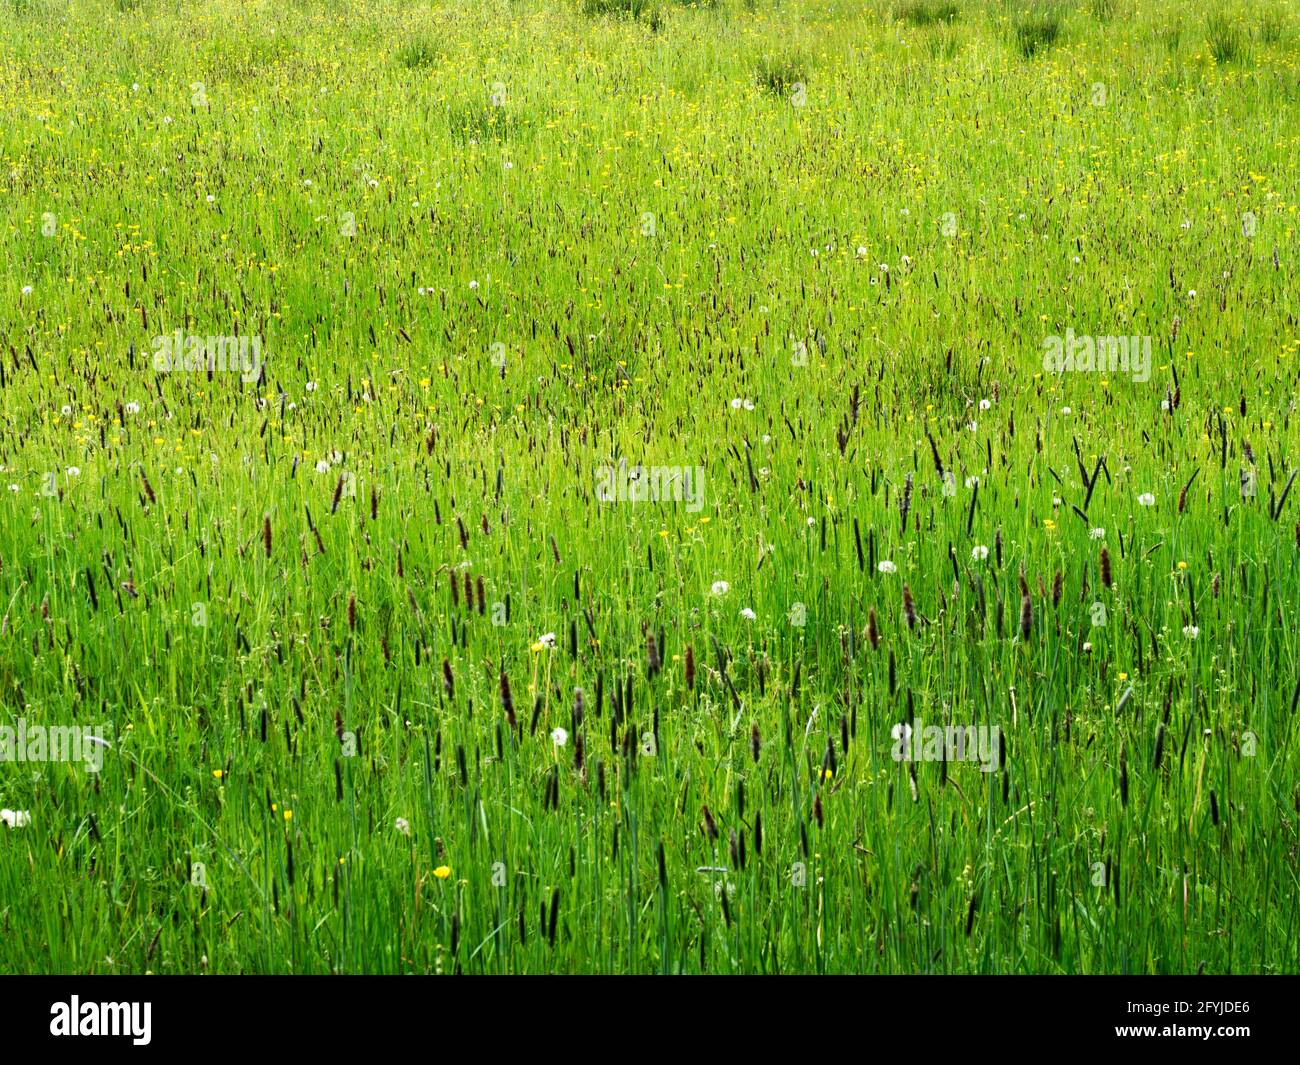 Meadow with long grasses buttercups and dandelion clocks between Bilton Lane and Nidd Gorge Woods Knaresborough Yorkshire England Stock Photo